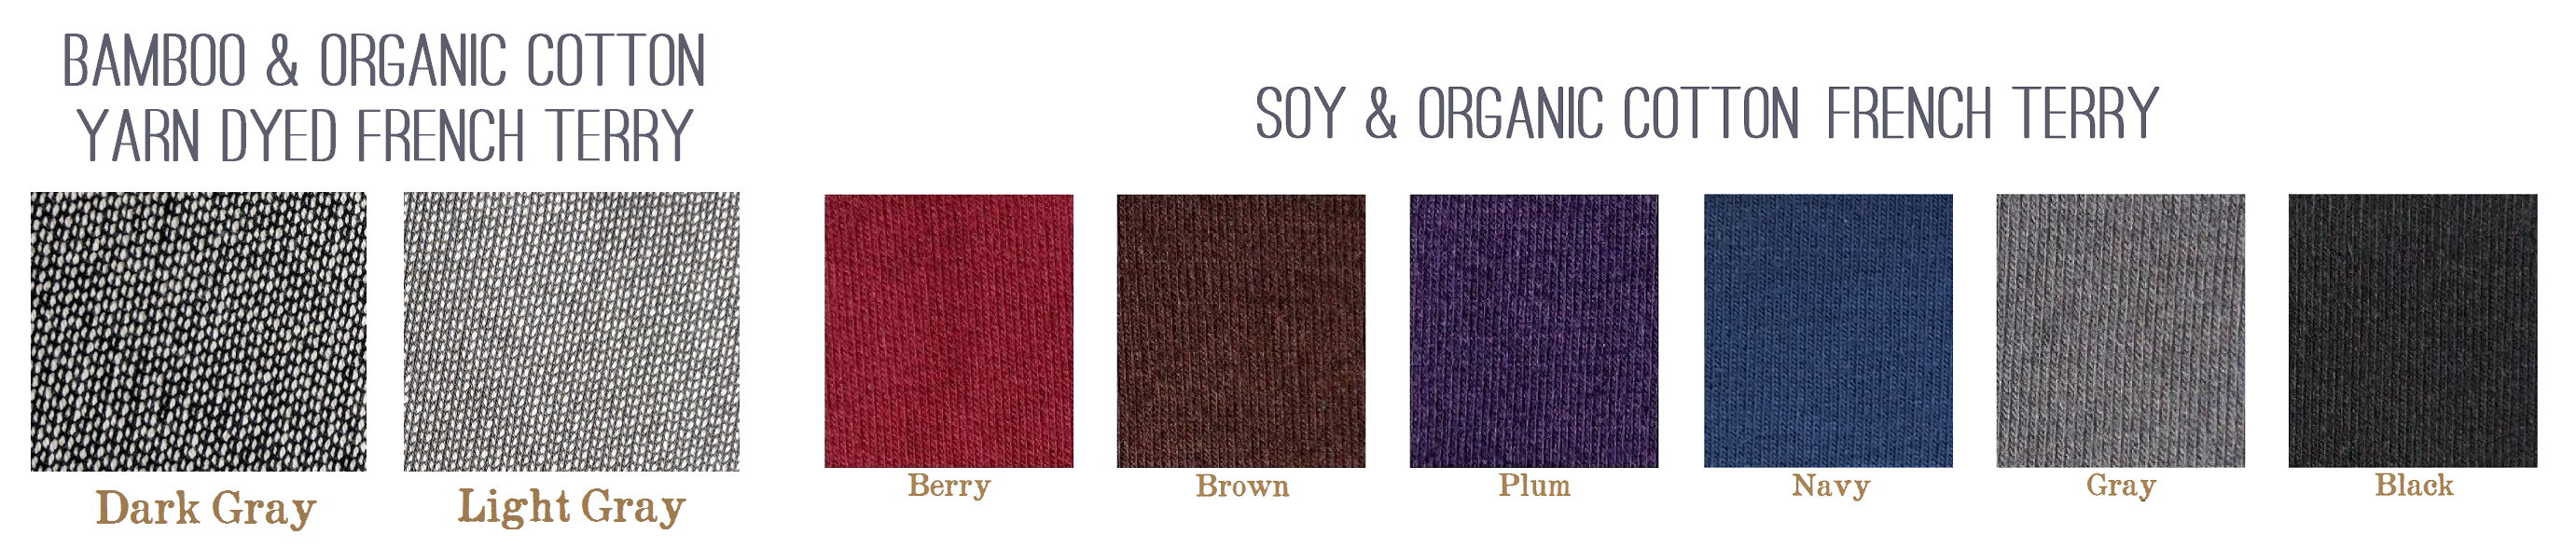 French Terry comes in Yarn Dyed Dark Gray and Light Gray, and Solid Berry, Brown, Plum, Navy, Gray, and Black